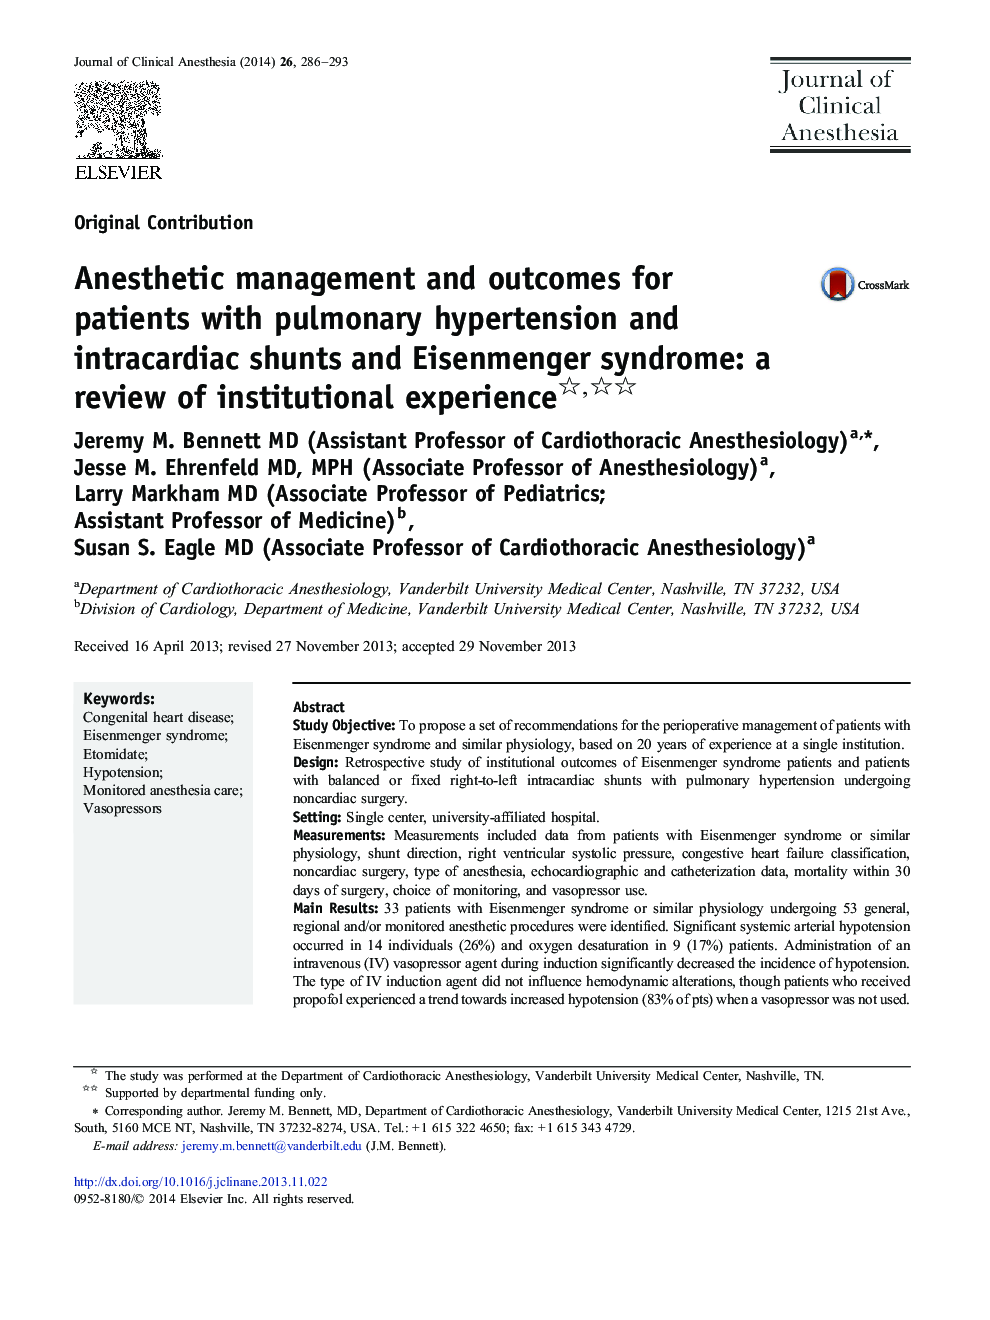 Anesthetic management and outcomes for patients with pulmonary hypertension and intracardiac shunts and Eisenmenger syndrome: a review of institutional experience 